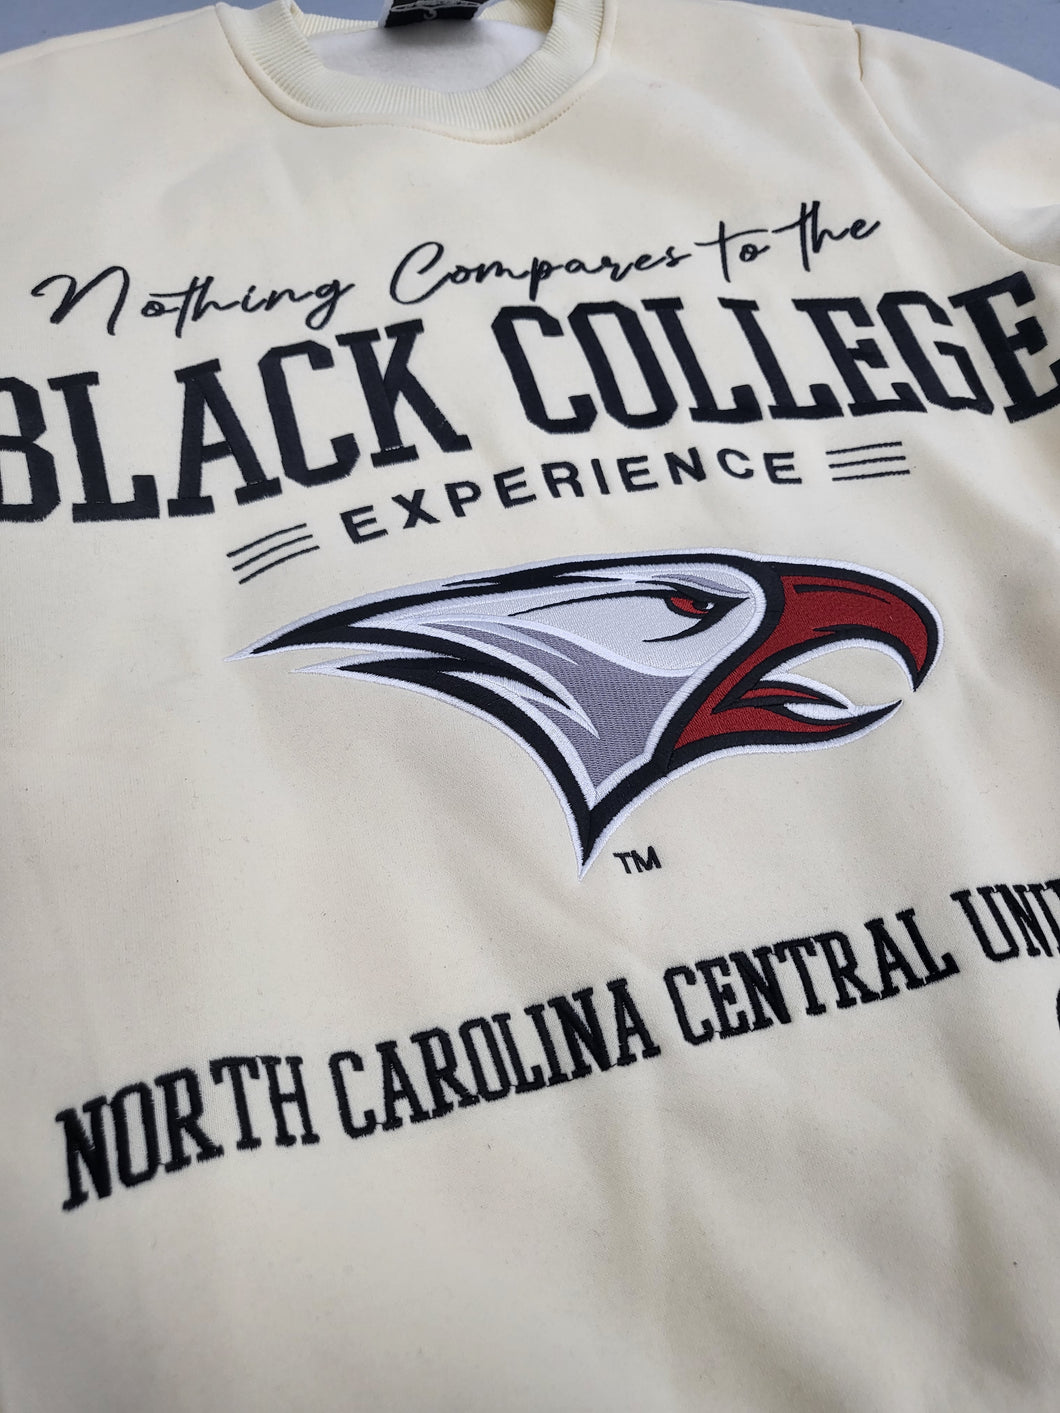 Nothing Compares To The Black College Experience- NCCU